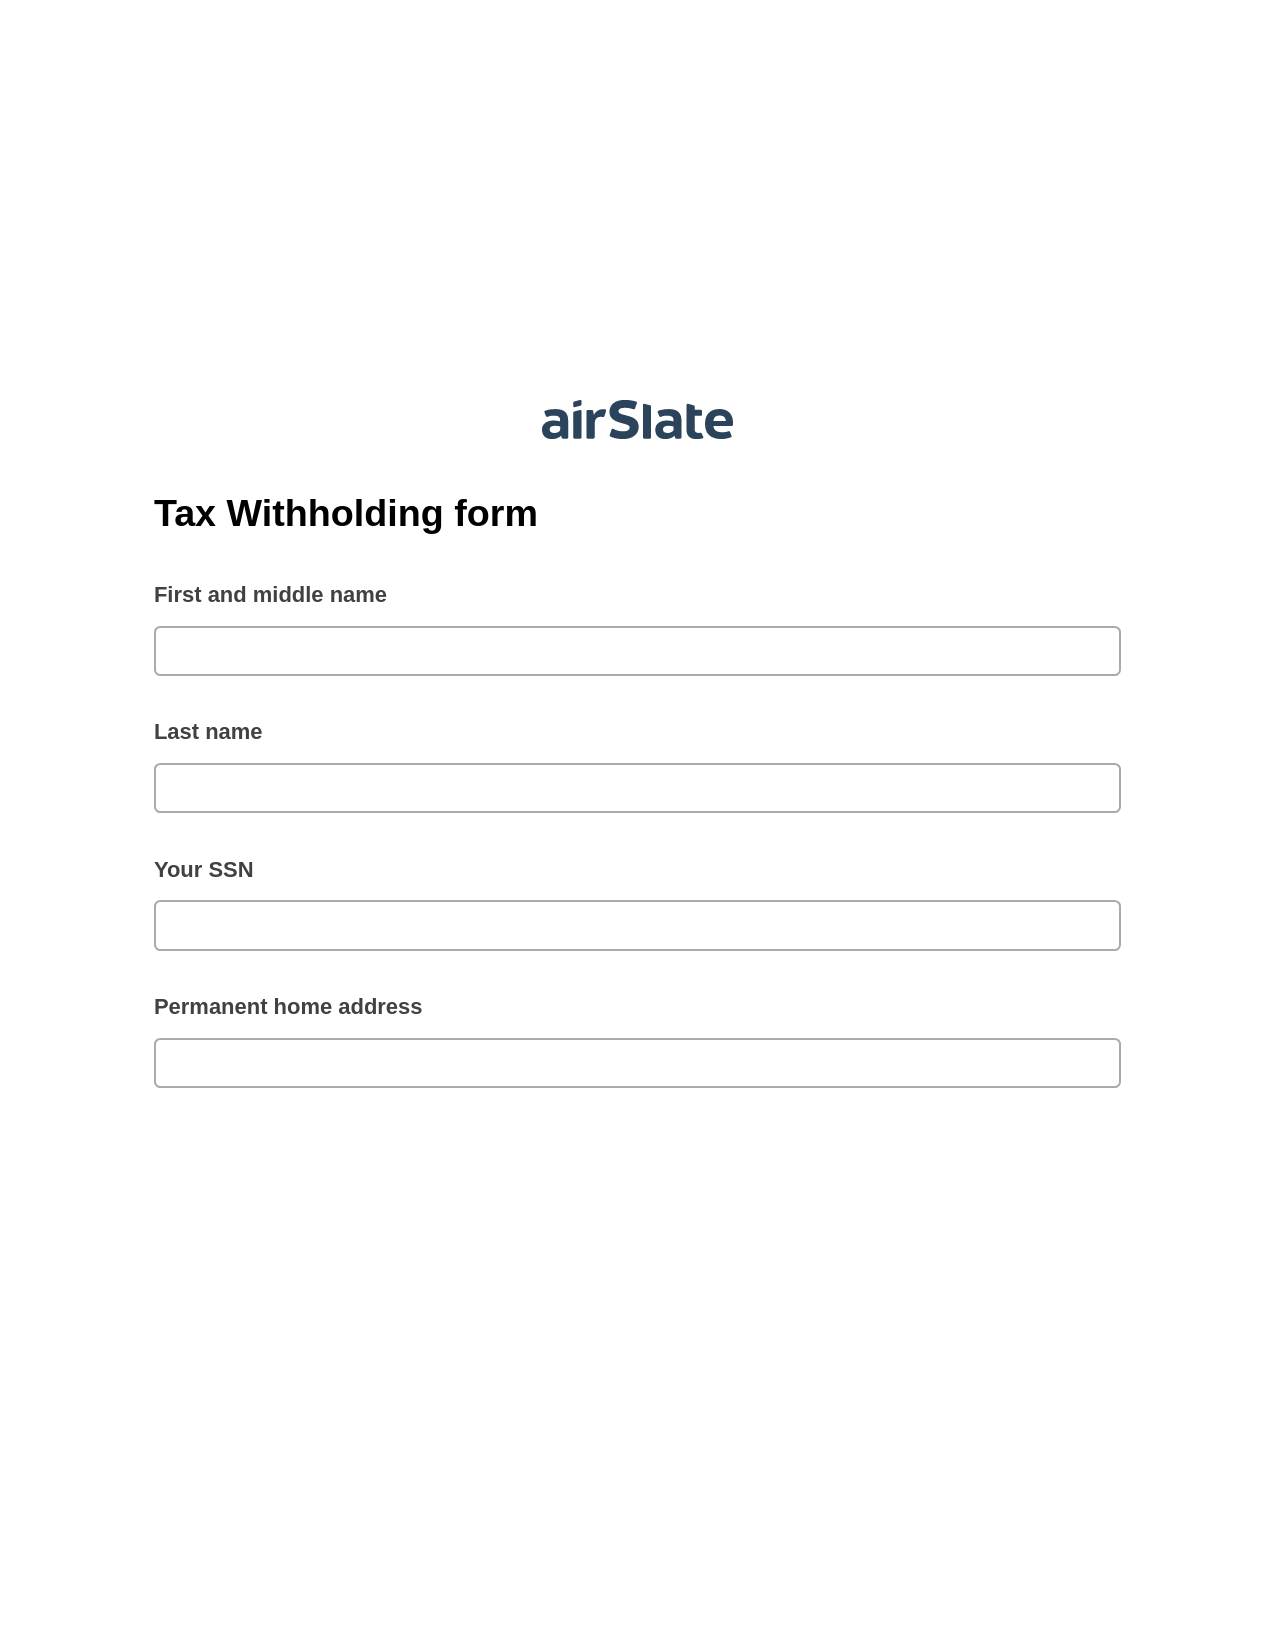 Multirole Tax Withholding form Pre-fill Slate from MS Dynamics 365 Records Bot, Jira Bot, Slack Two-Way Binding Bot